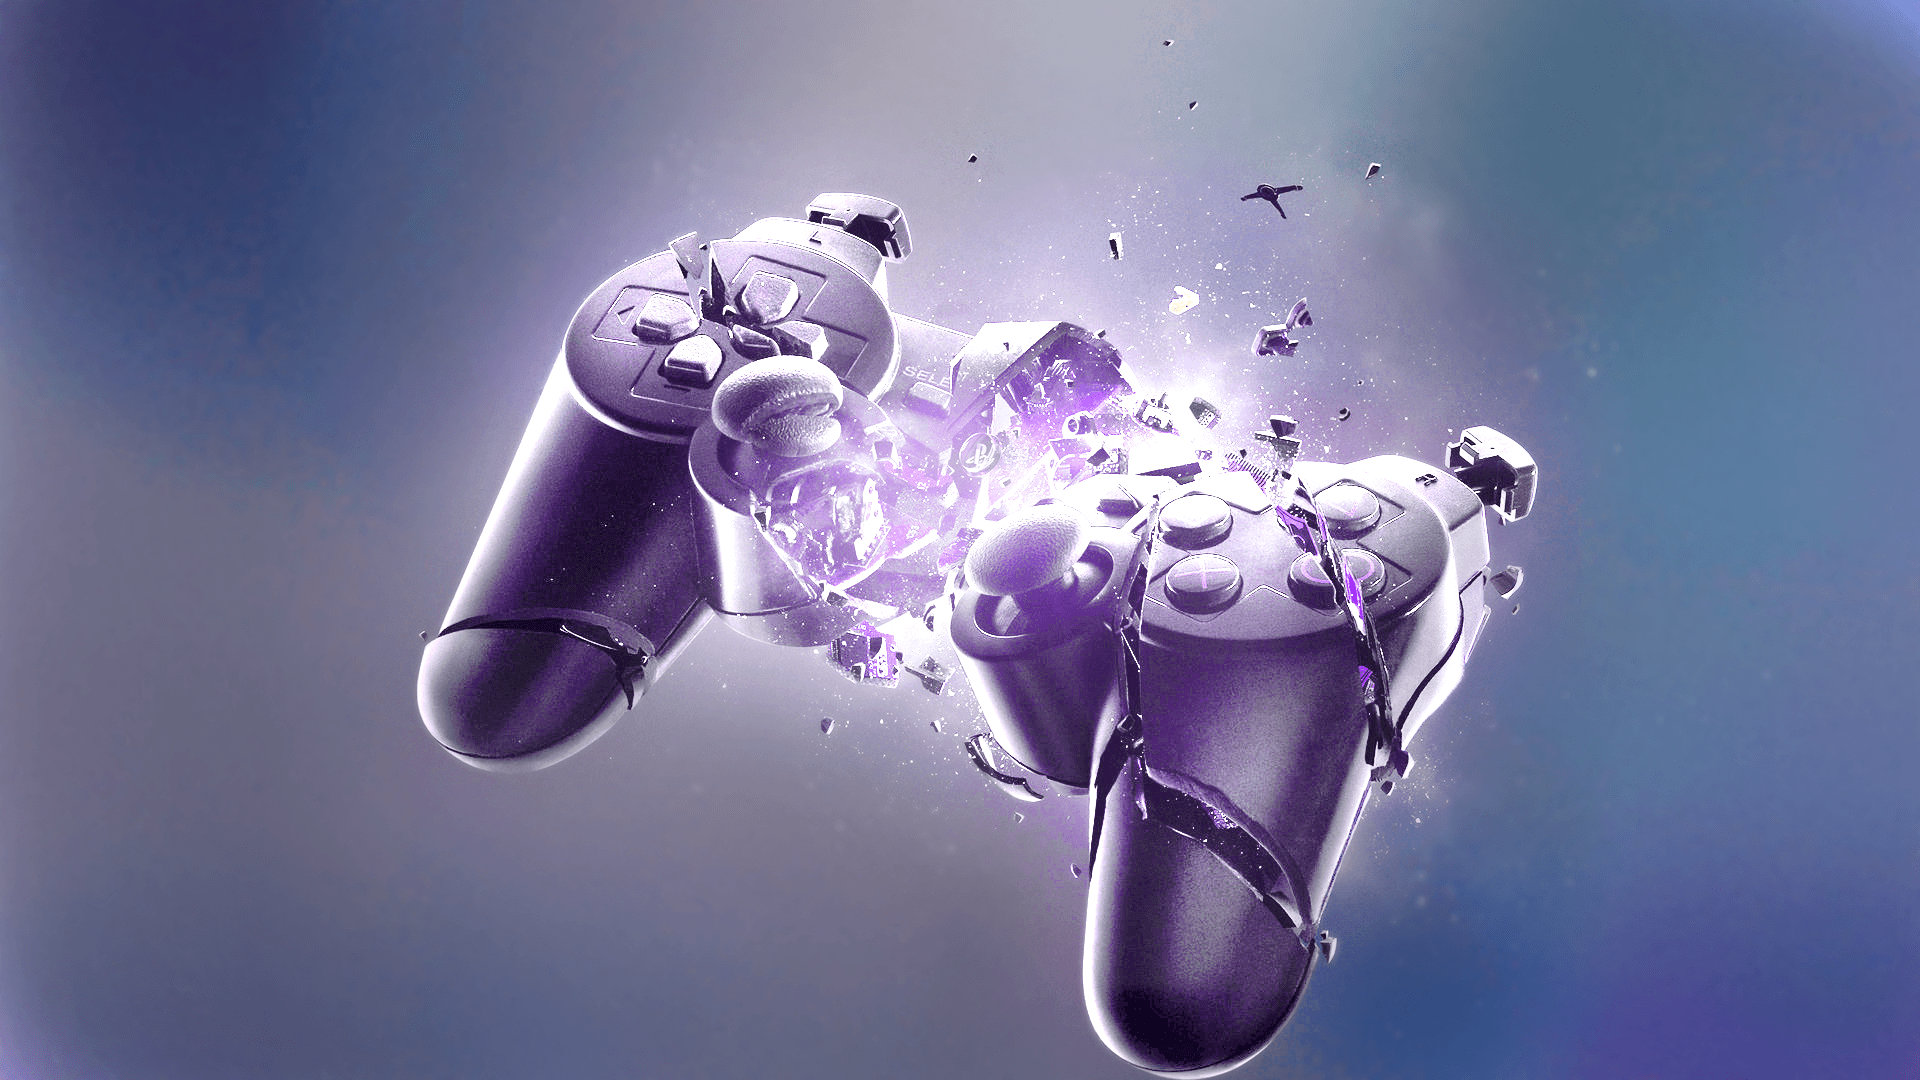 Wallpaper Vanossgaming Ps Controller Smashed 2153676. 1920x1080